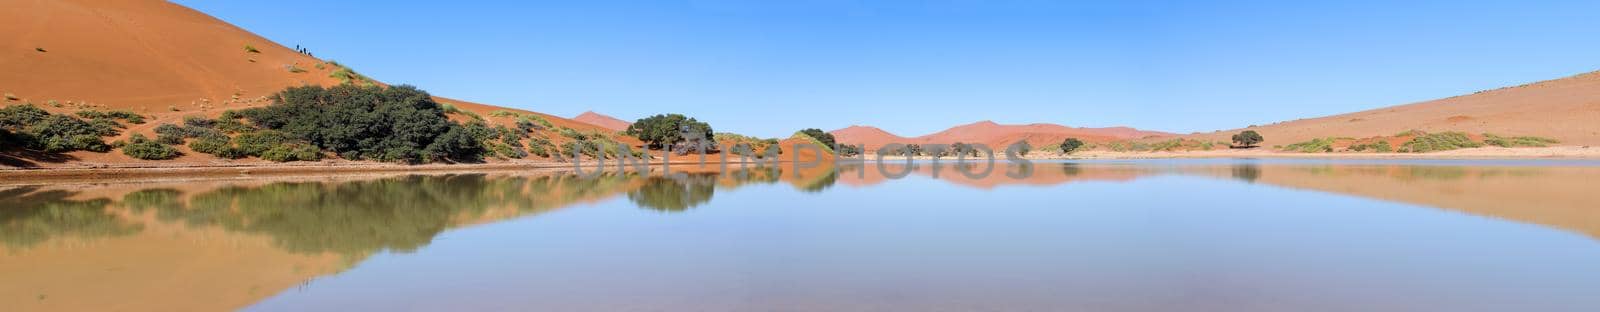 Panorama of Sossusvlei in Namibia full of water by dpreezg